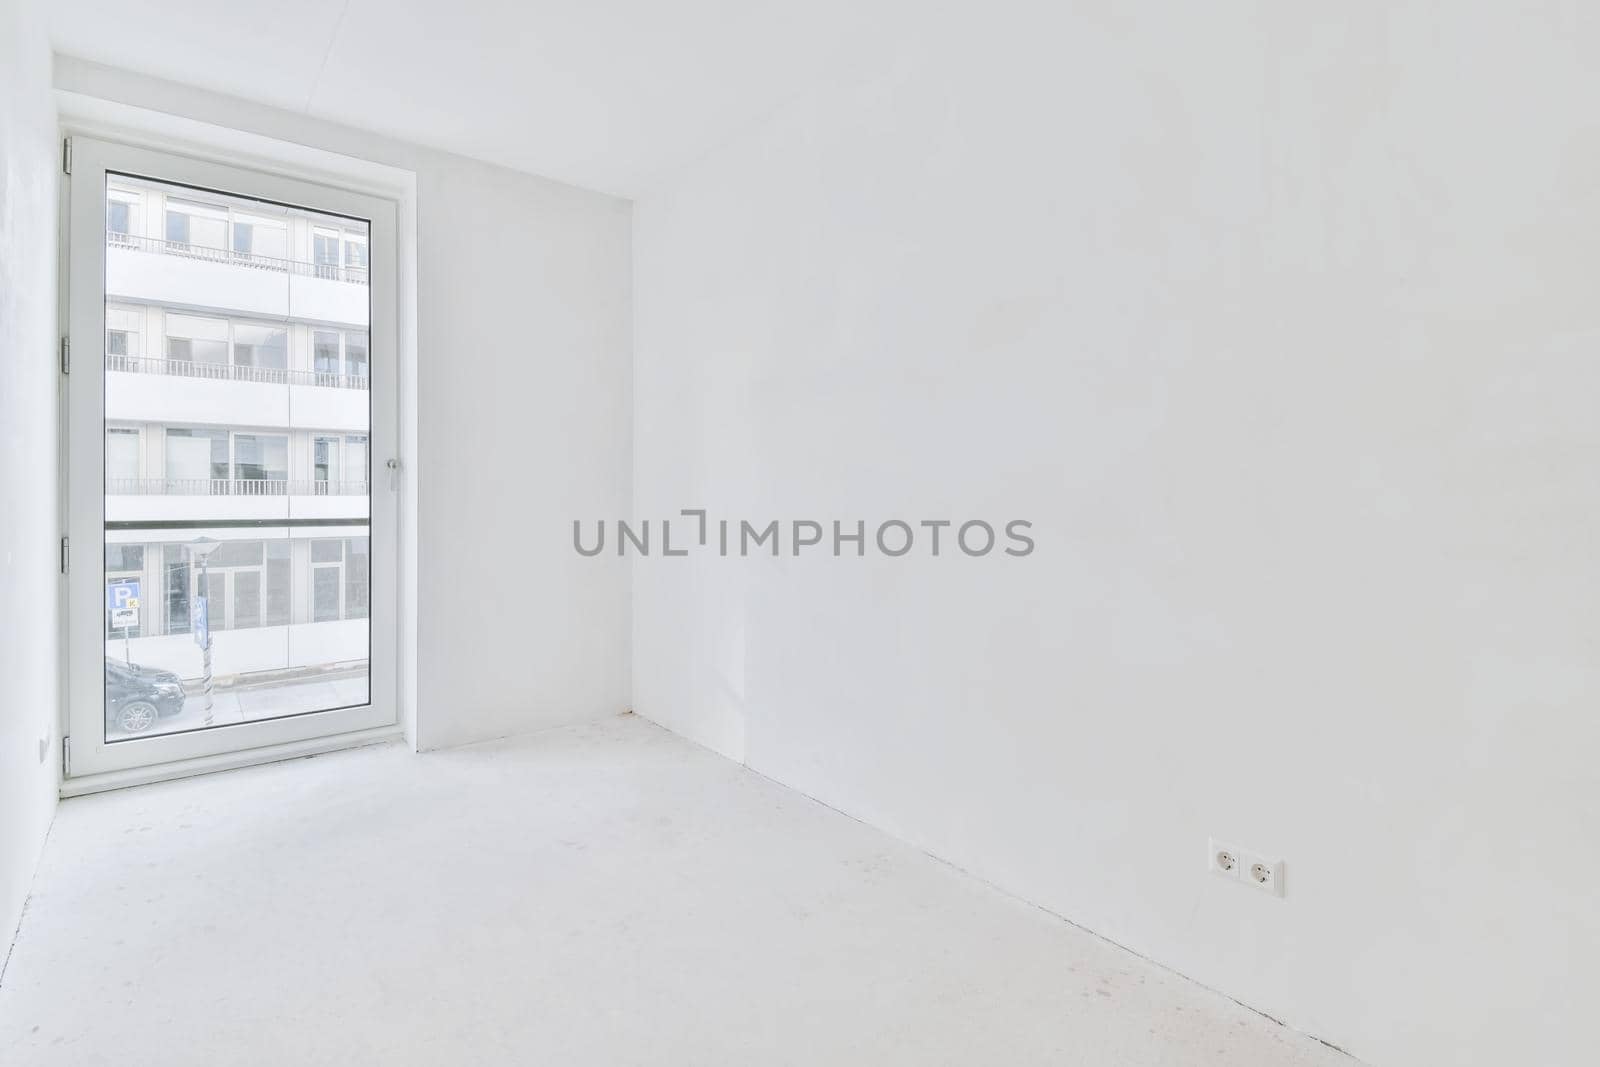 An absolutely white room with windows in an elegant apartment